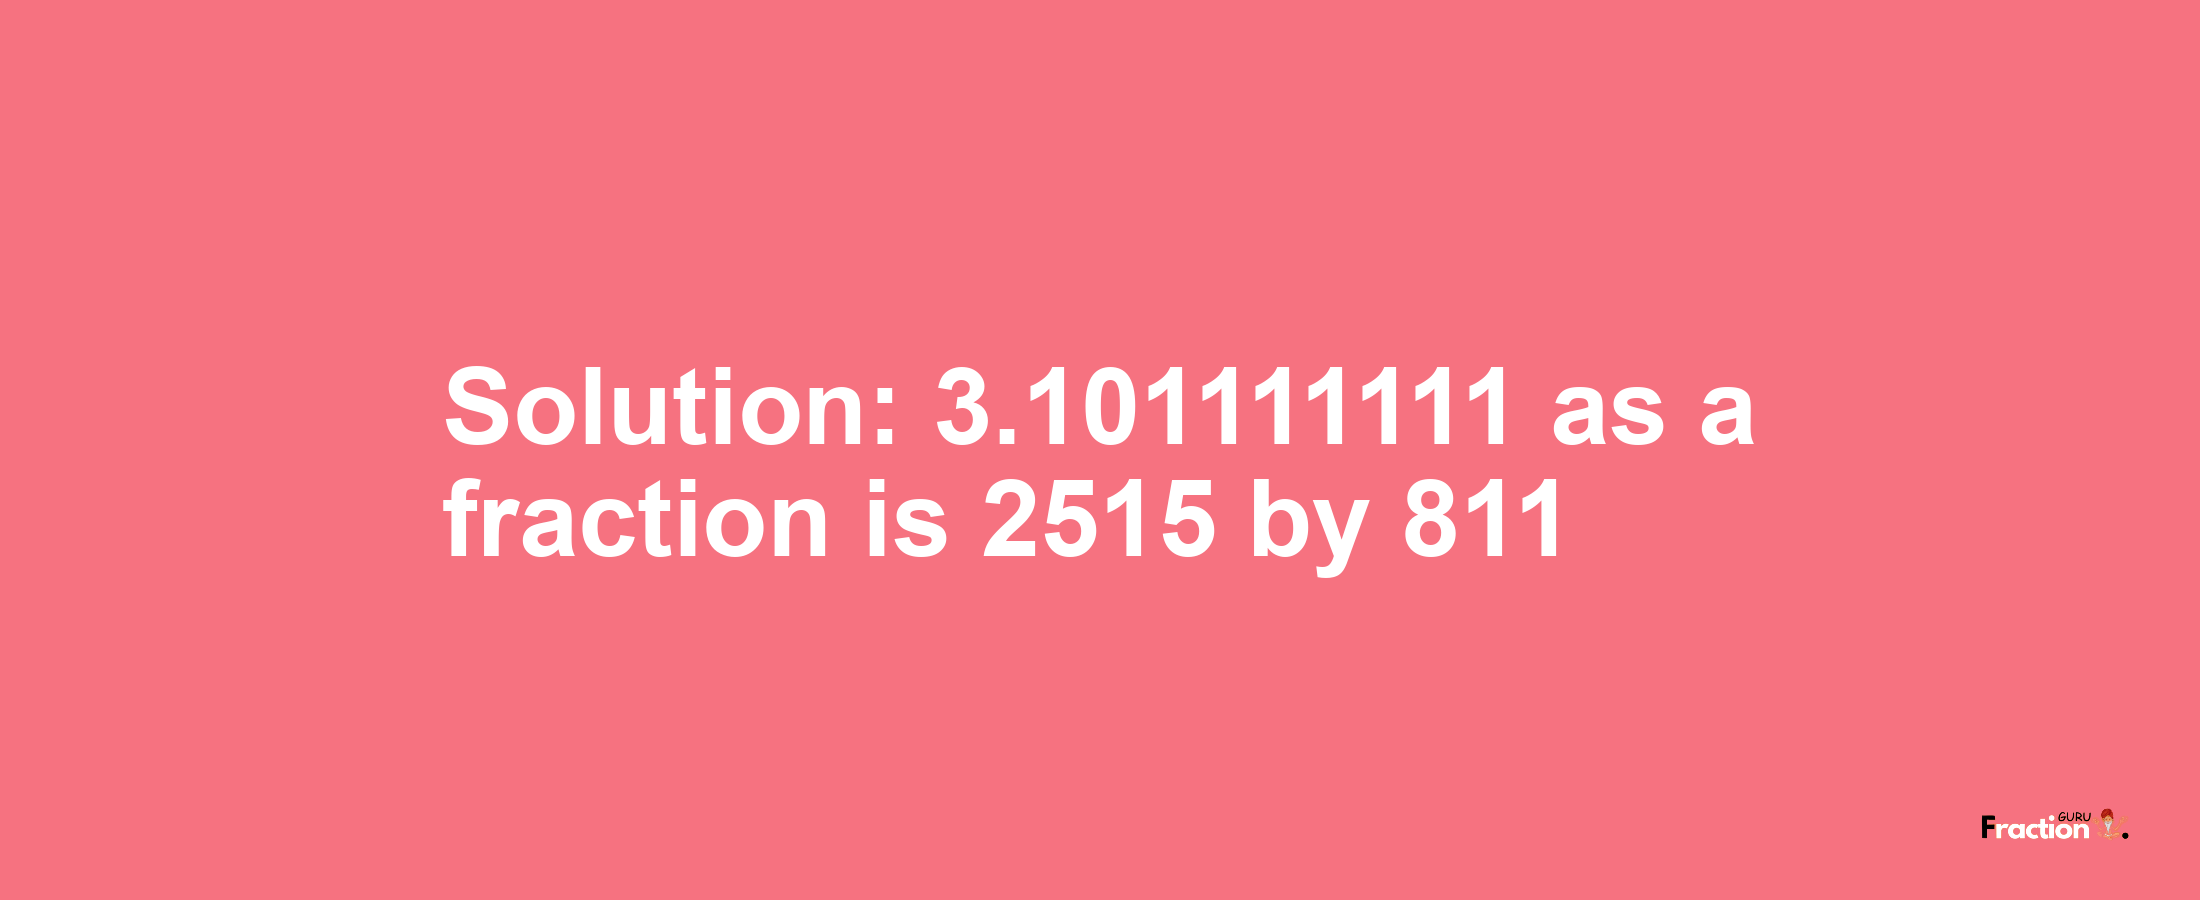 Solution:3.101111111 as a fraction is 2515/811